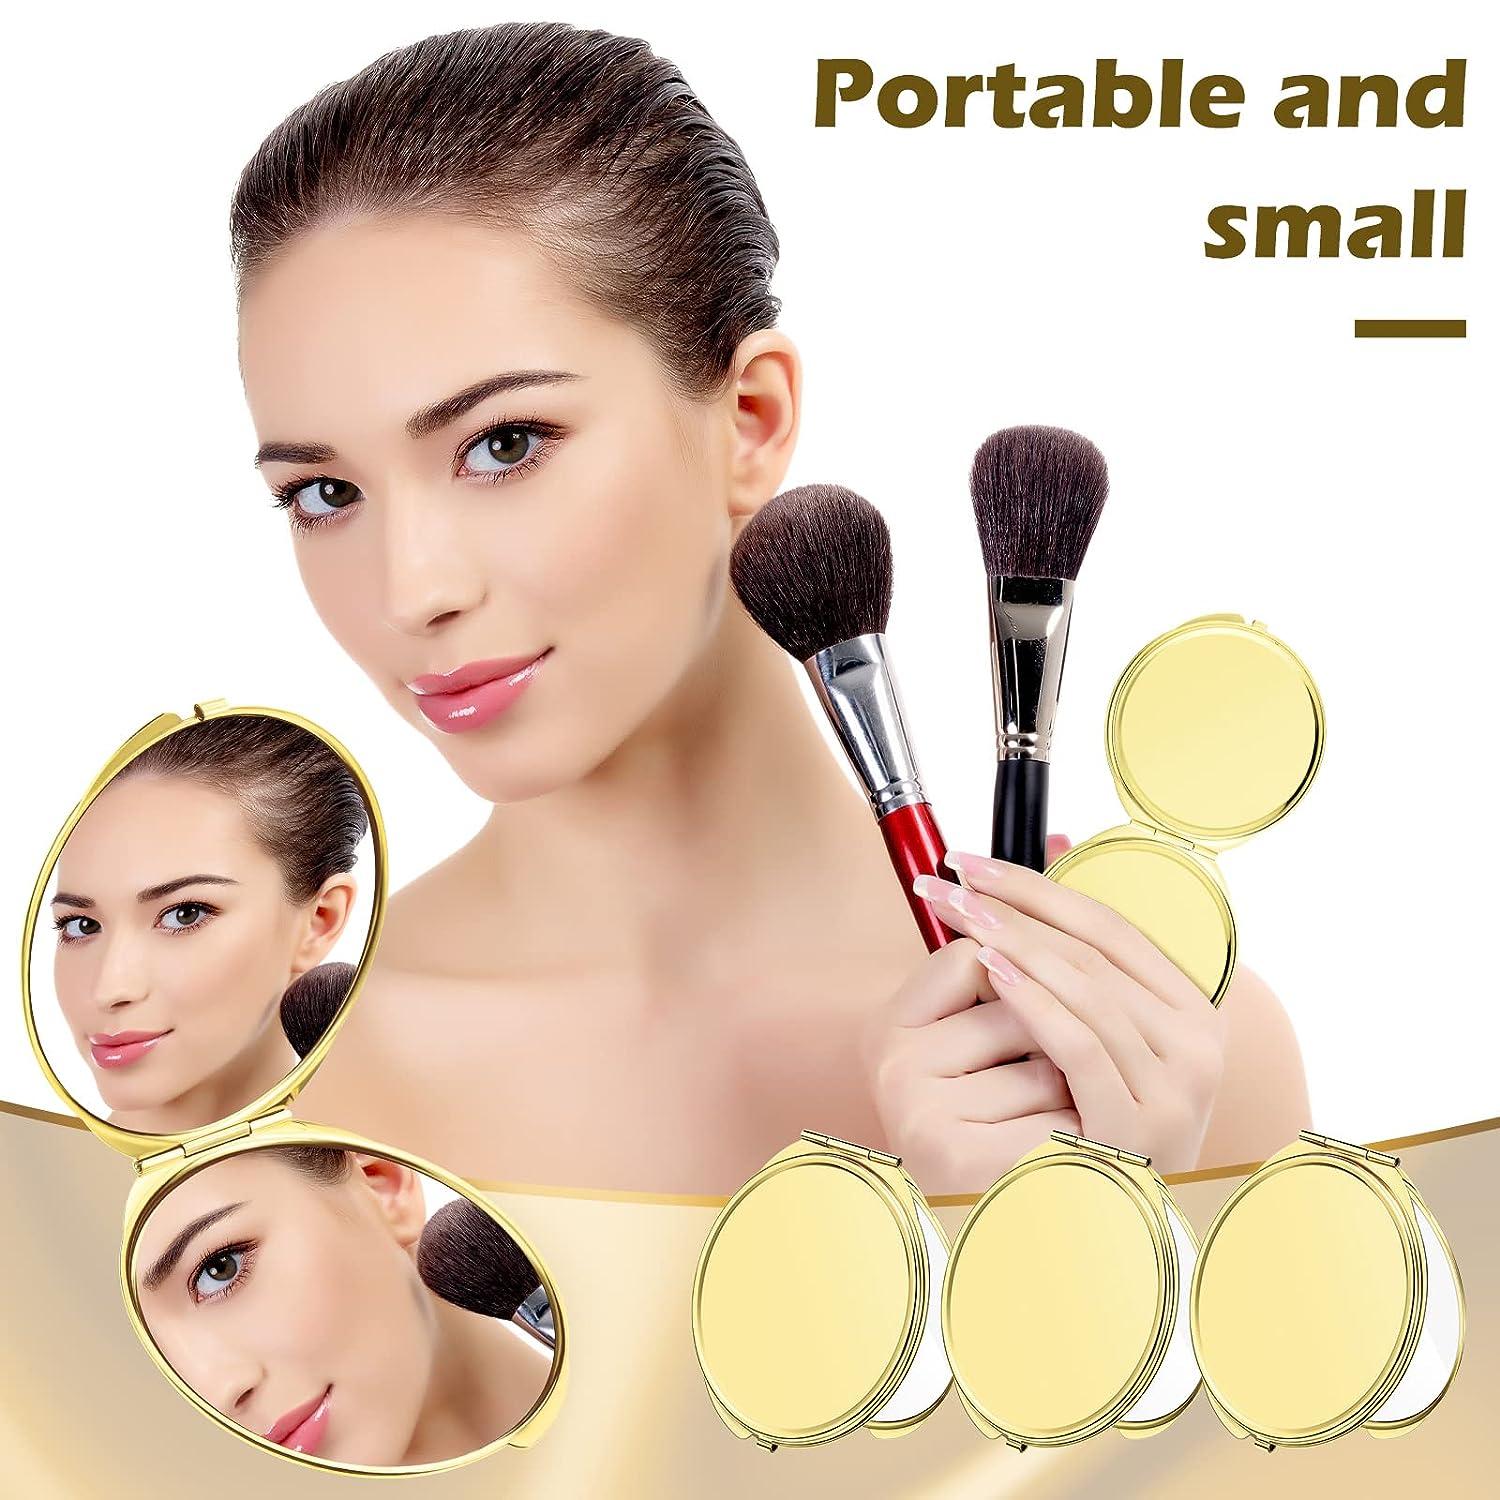 Compact Mirror, Travel Makeup Mirror, Small Portable Mirror for Purse  Pocket, 1X/3X Handheld Magnifying Mirror(Plum Blossom) : Amazon.in: Beauty